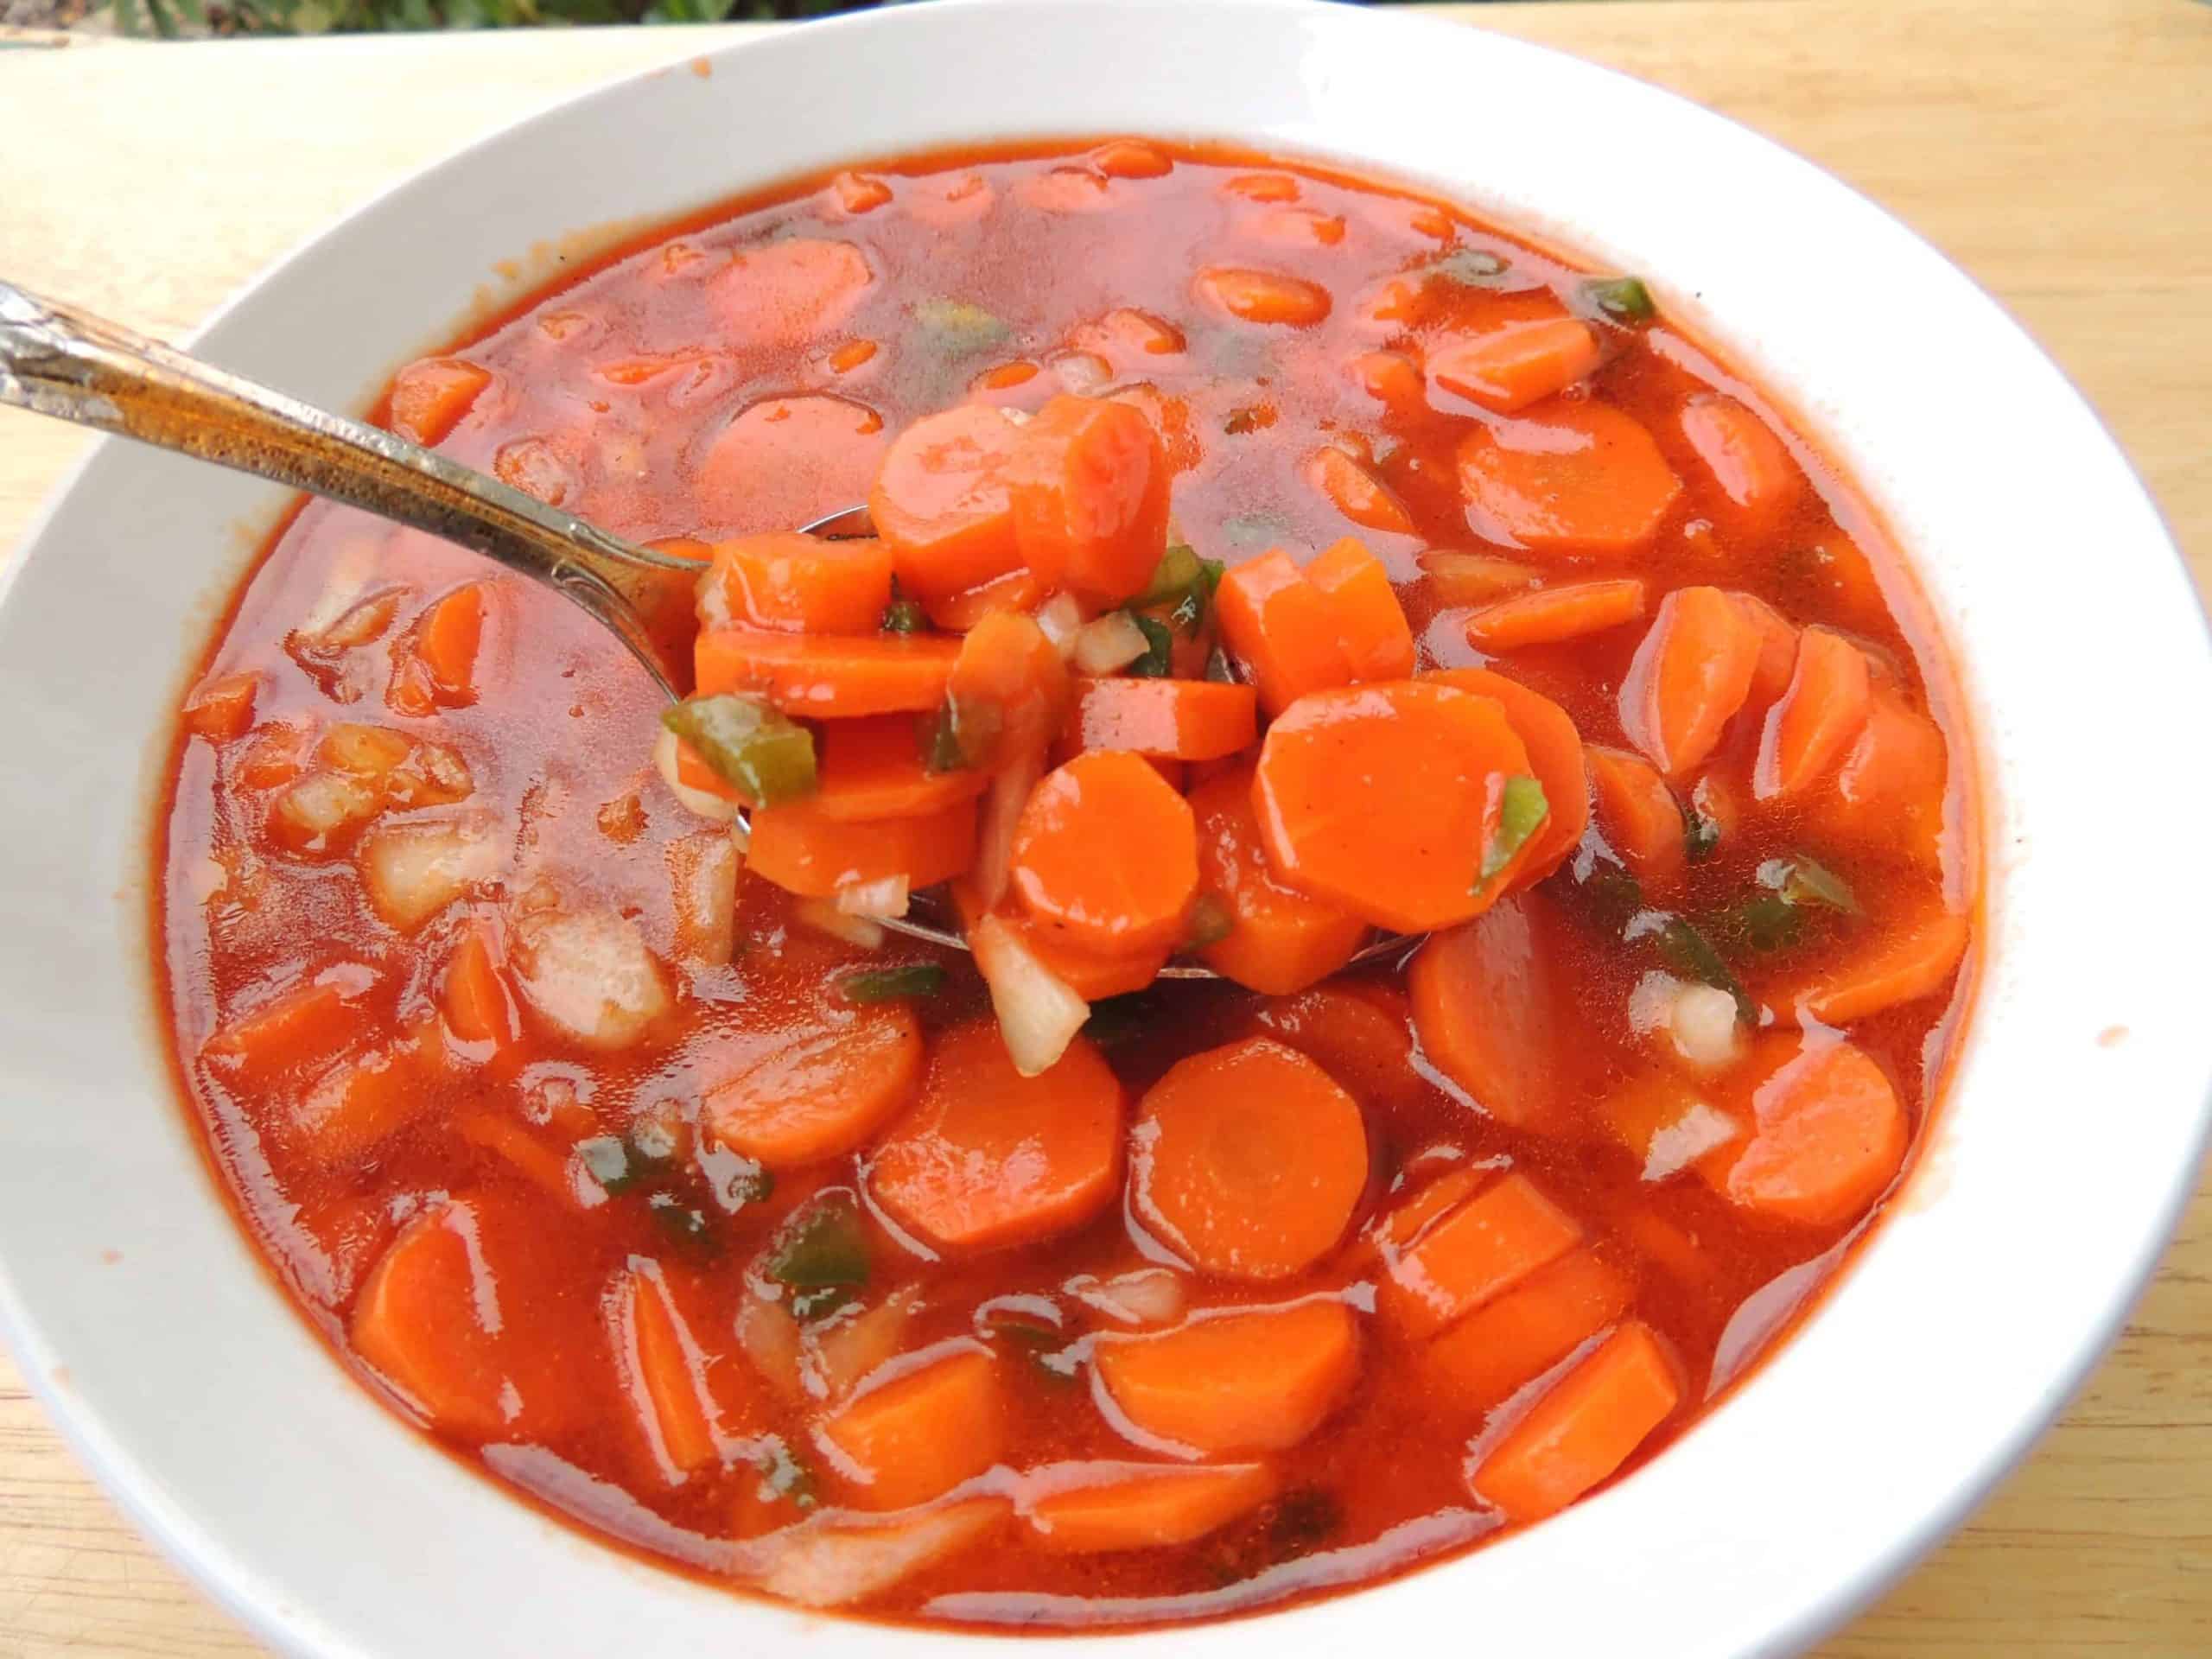 https://www.southernplate.com/wp-content/uploads/2016/01/marinated-carrots-scaled.jpg